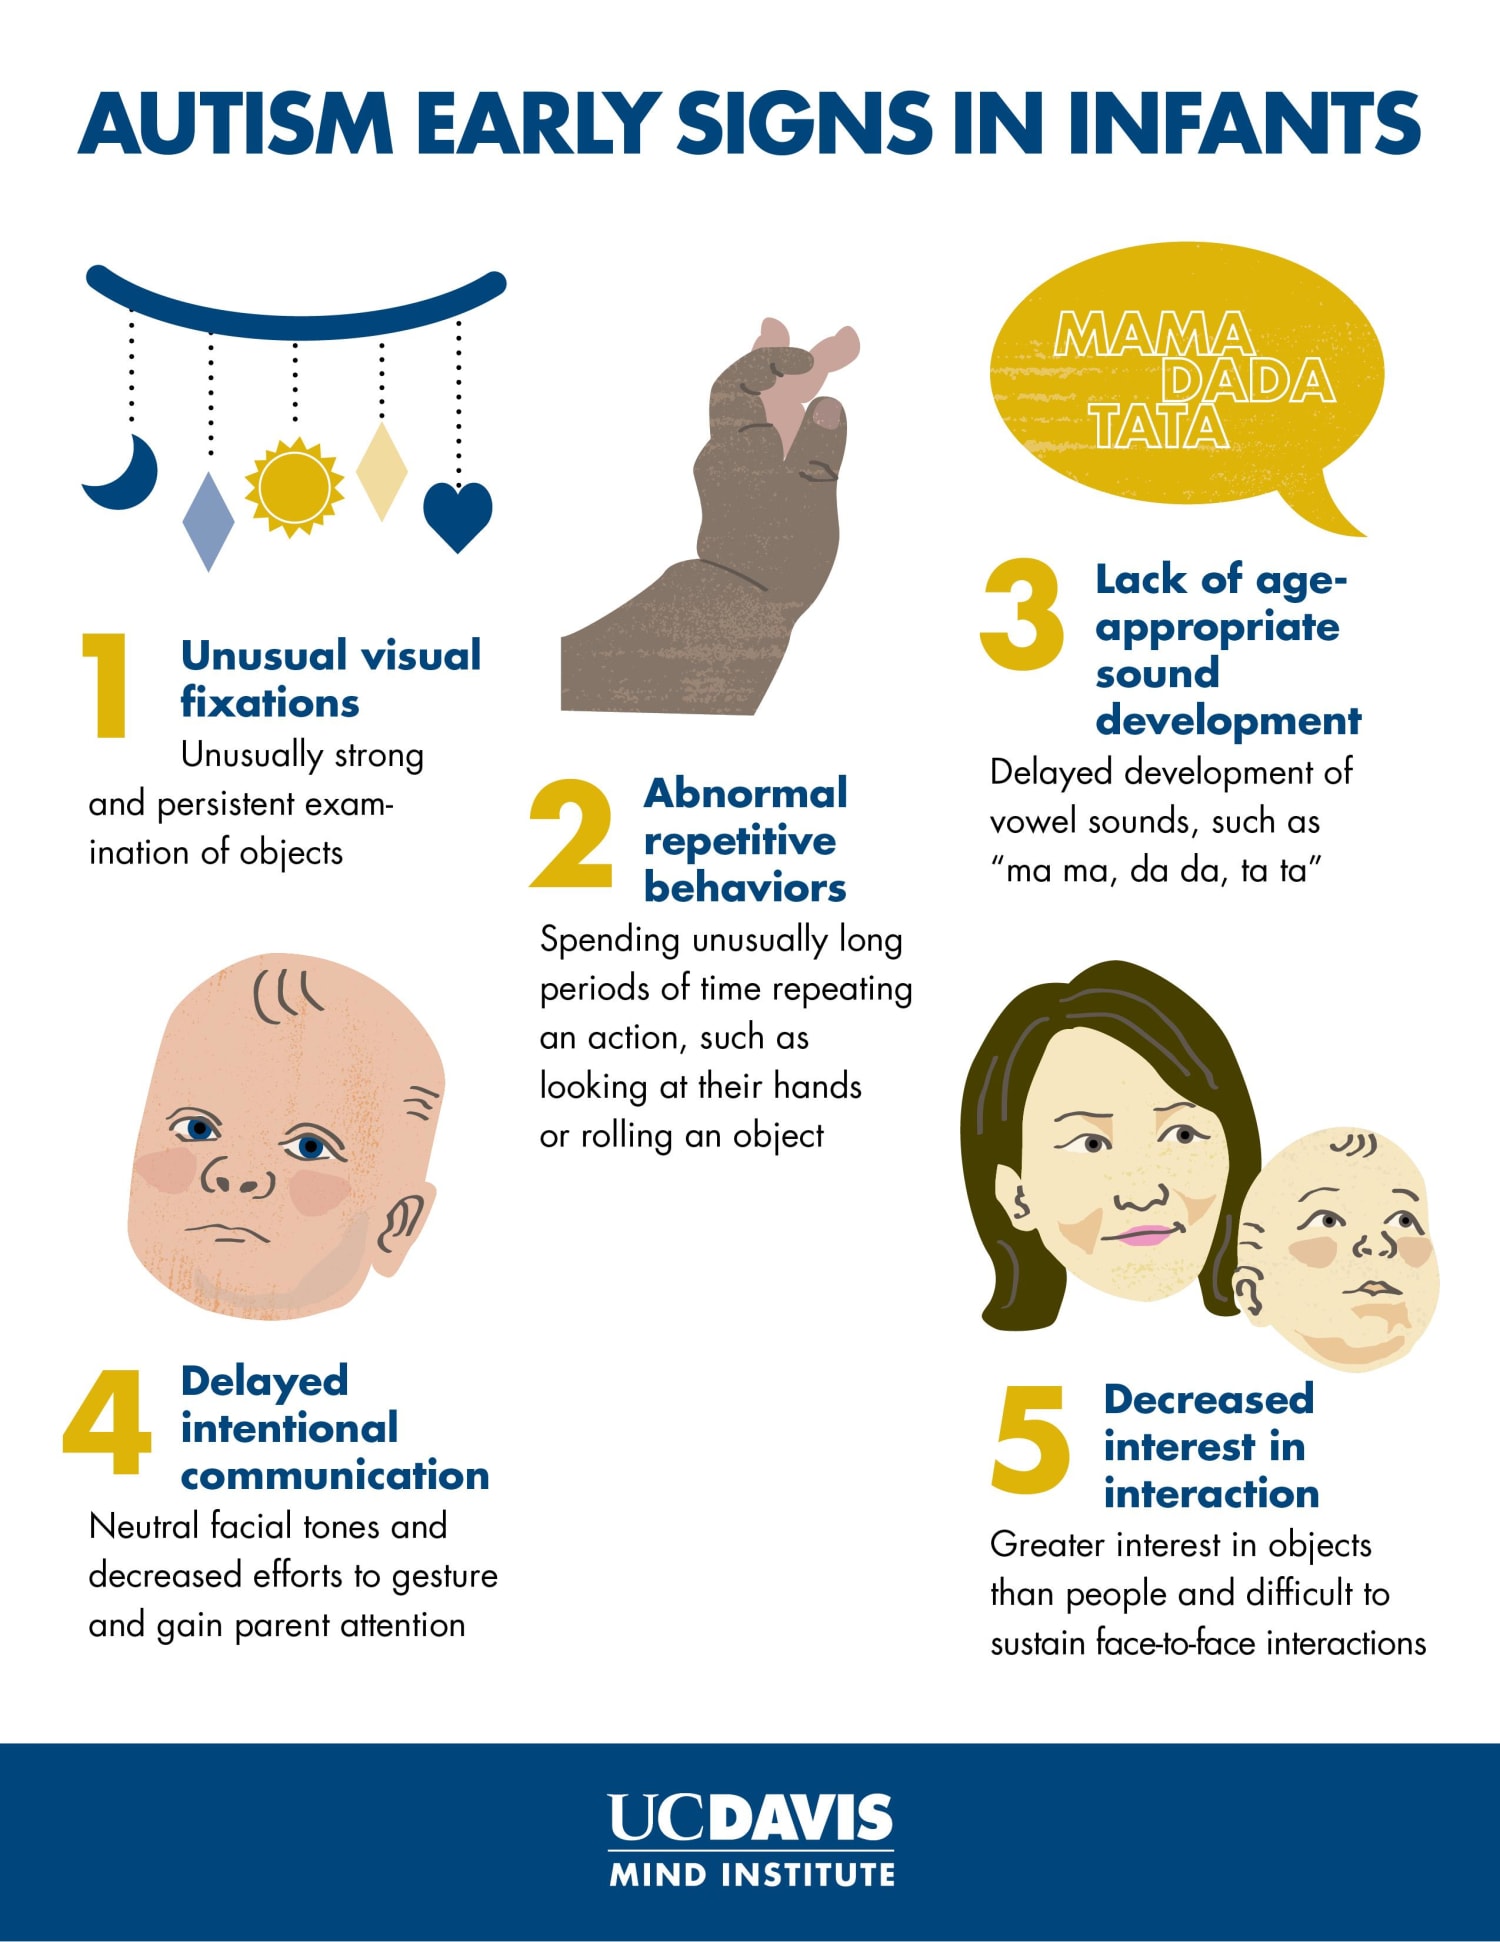 What are the 3 main symptoms of autism in babies?